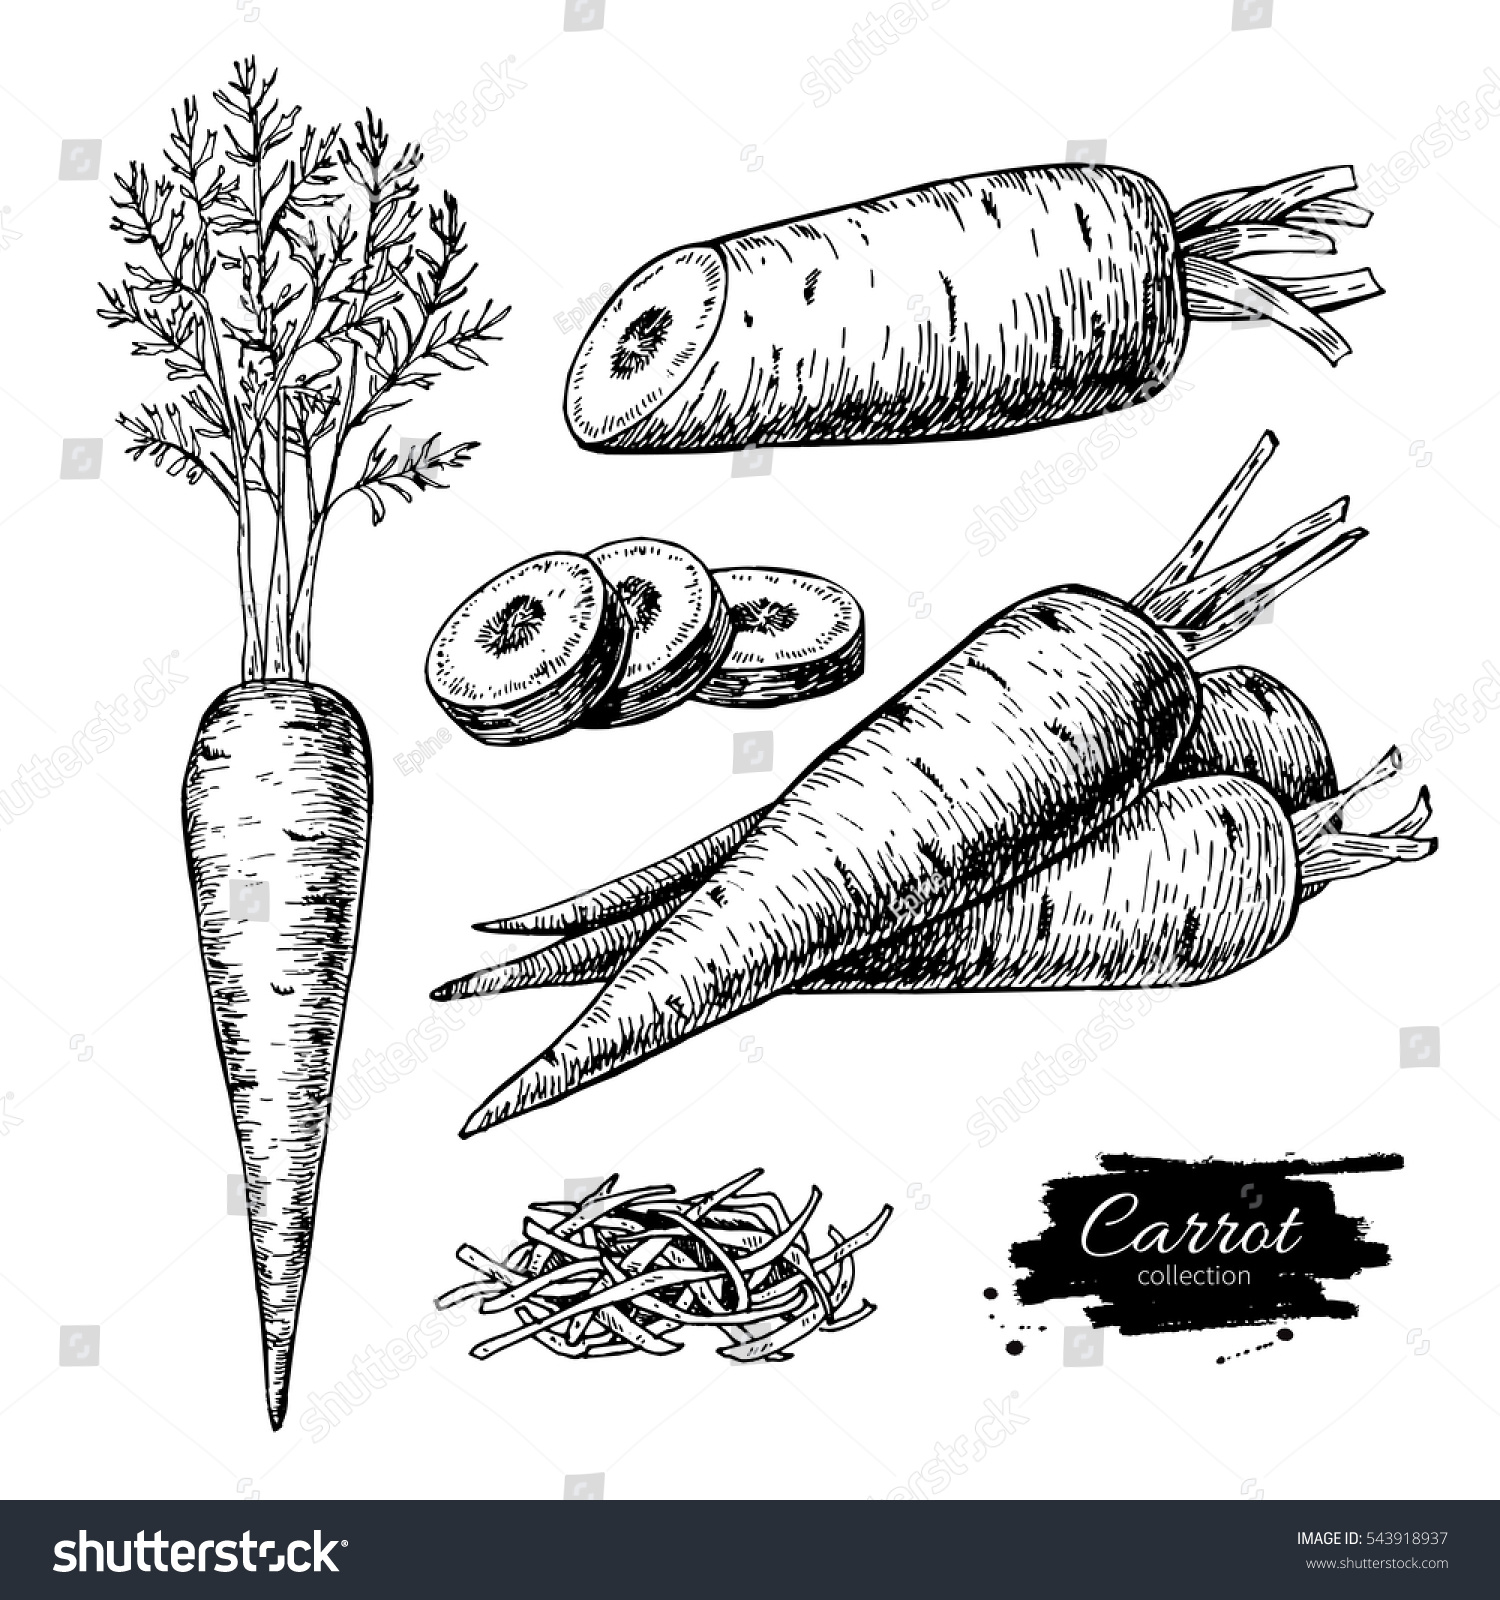 Carrot hand drawn vector illustration set. Isolated Vegetable engraved style object with sliced pieces. Detailed vegetarian food drawing. Farm market product. Great for menu, label, icon #543918937